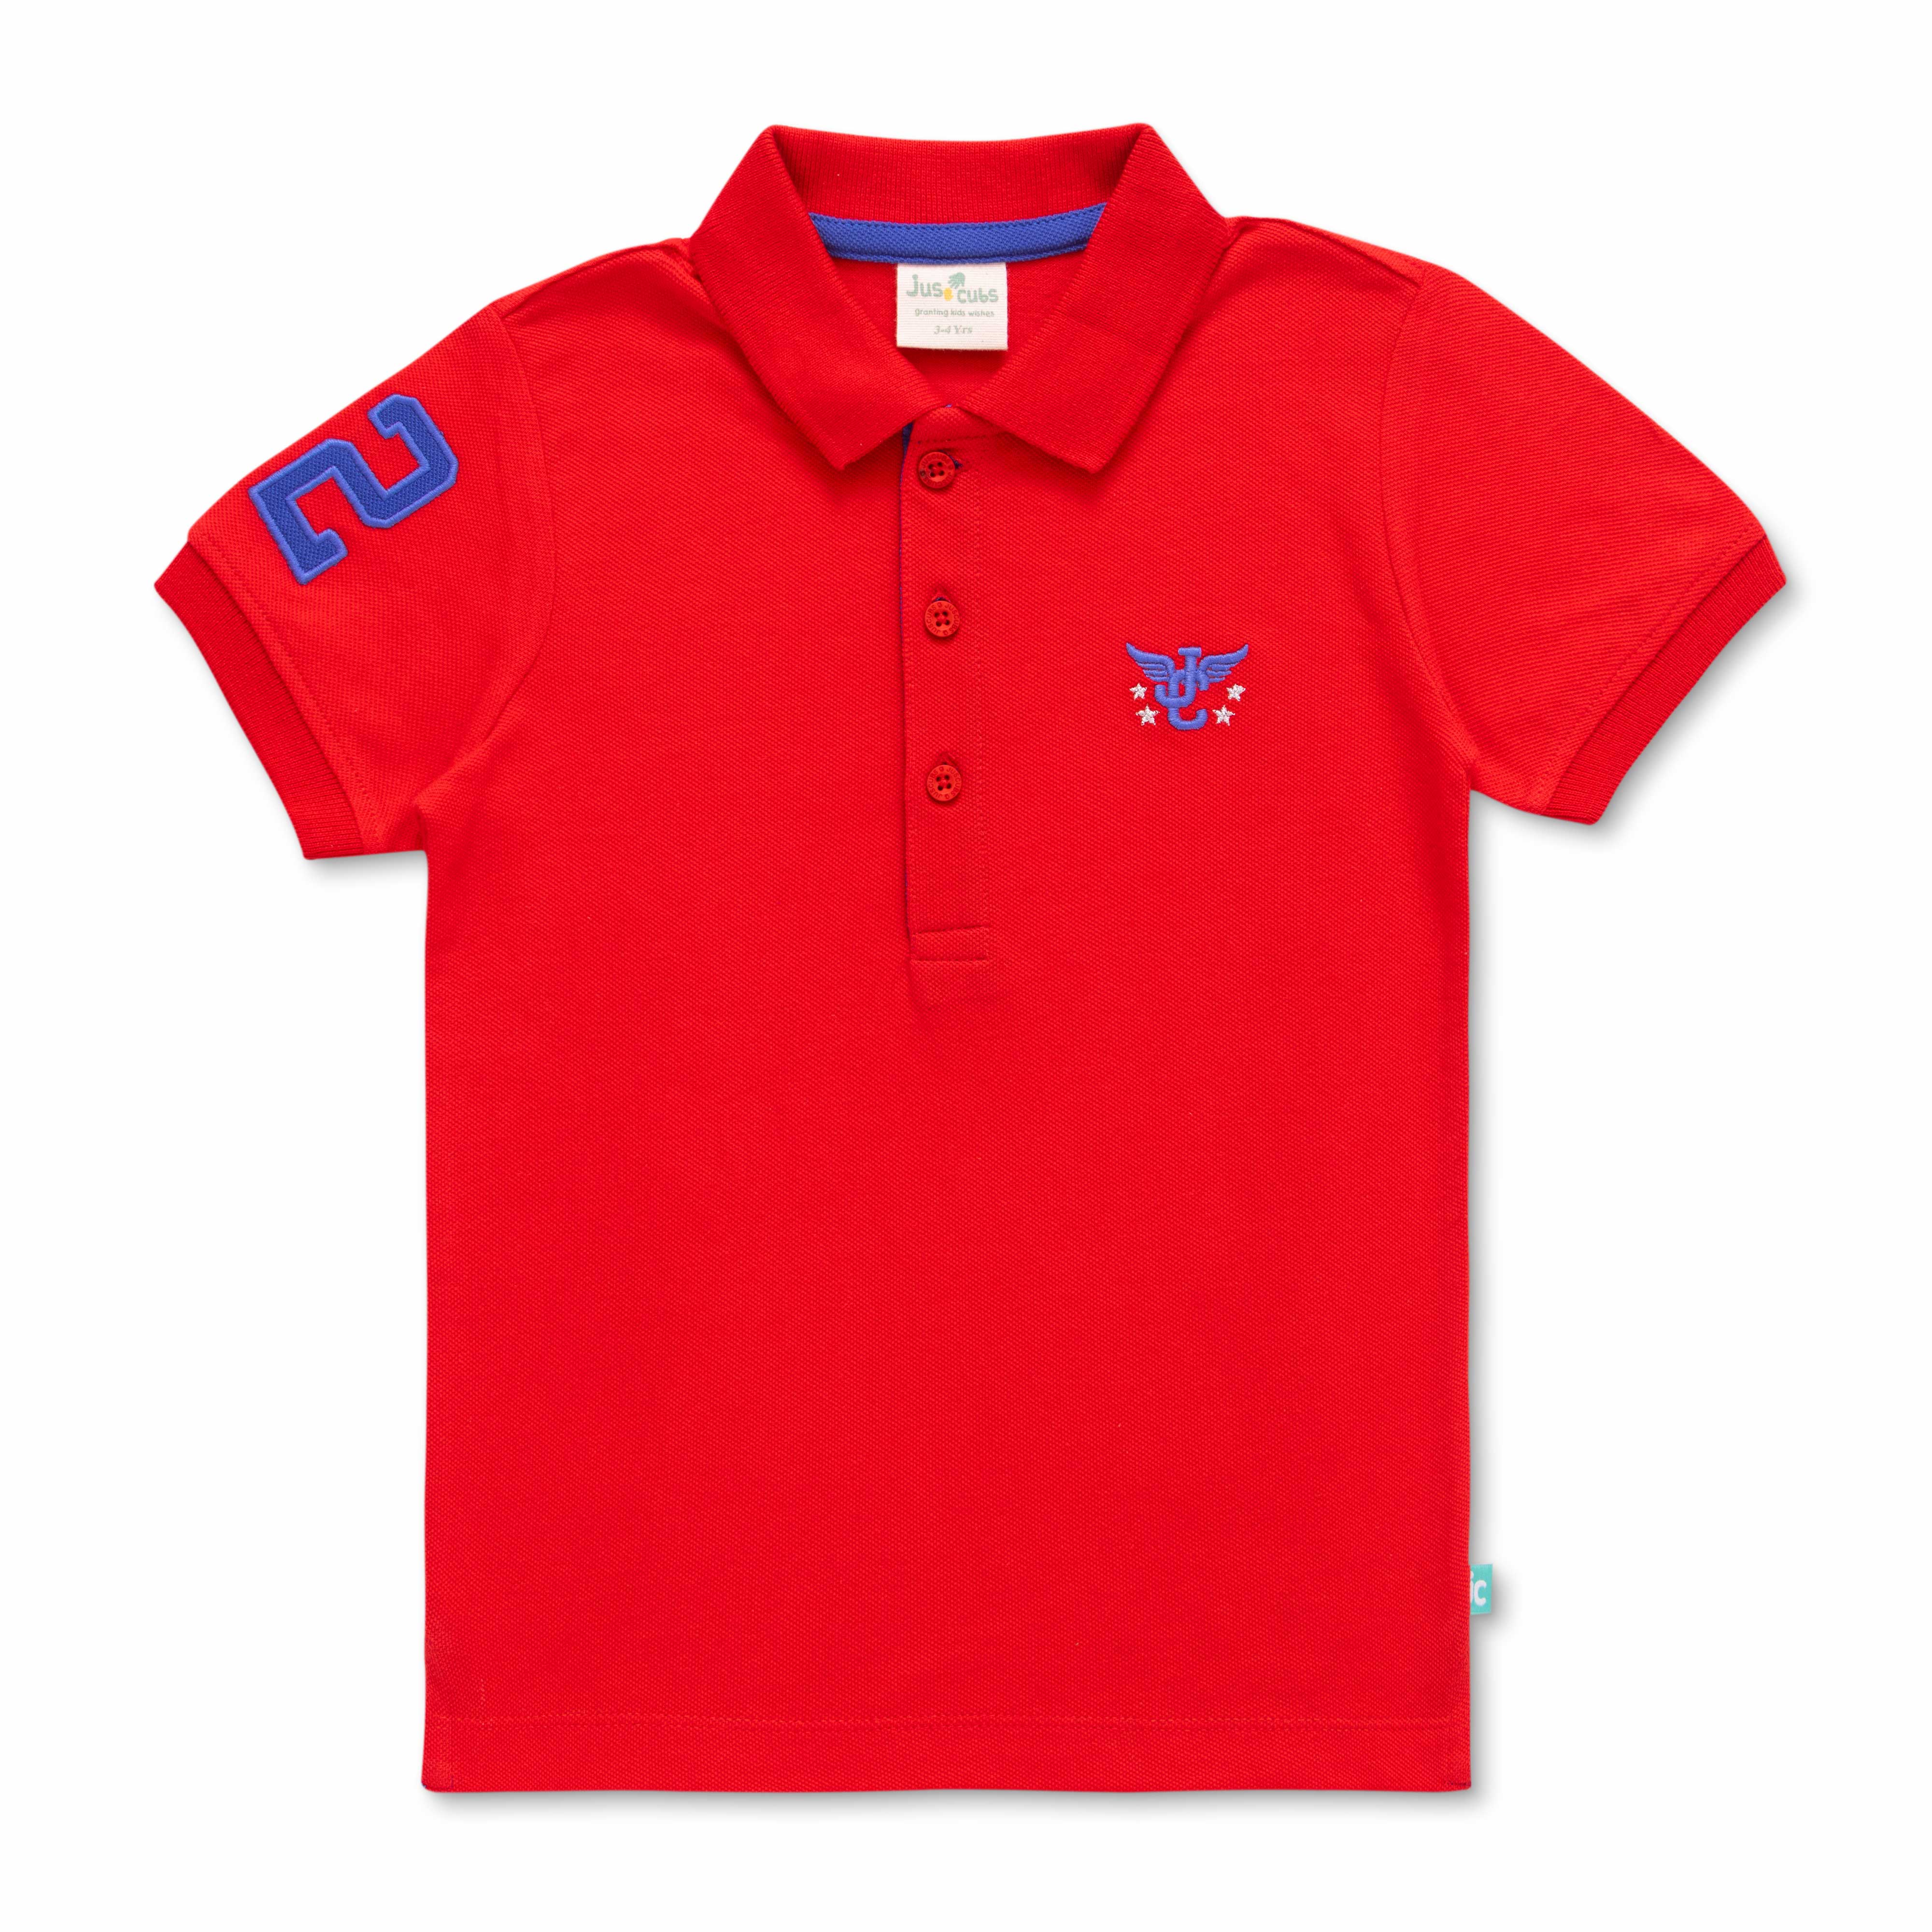 Boys Half Sleeve Solid Polo T-Shirt Pack of 2